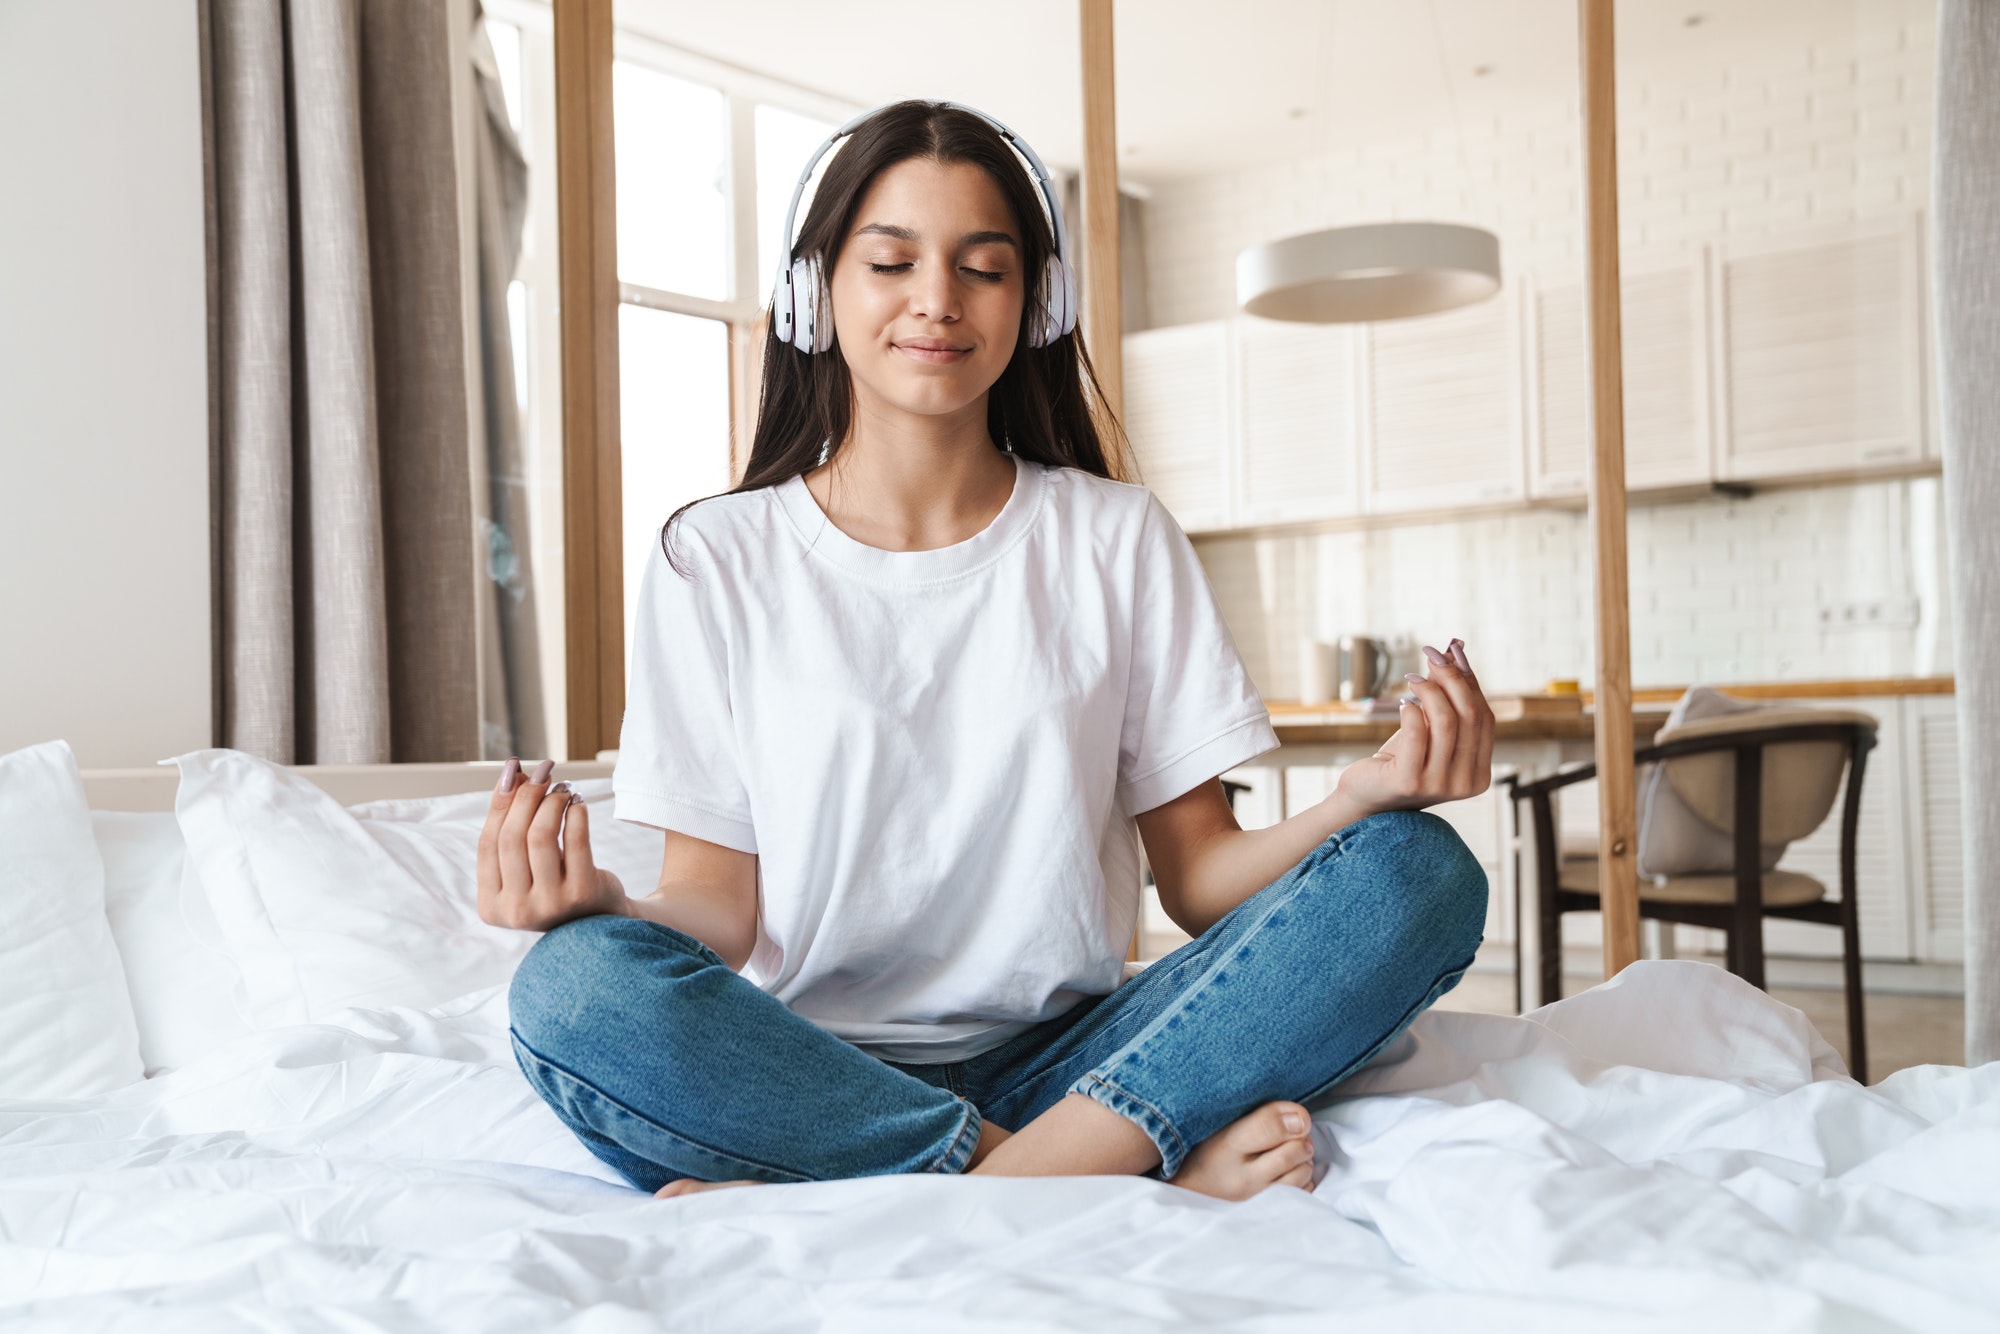 Photo of smiling woman using wireless headphone while meditating